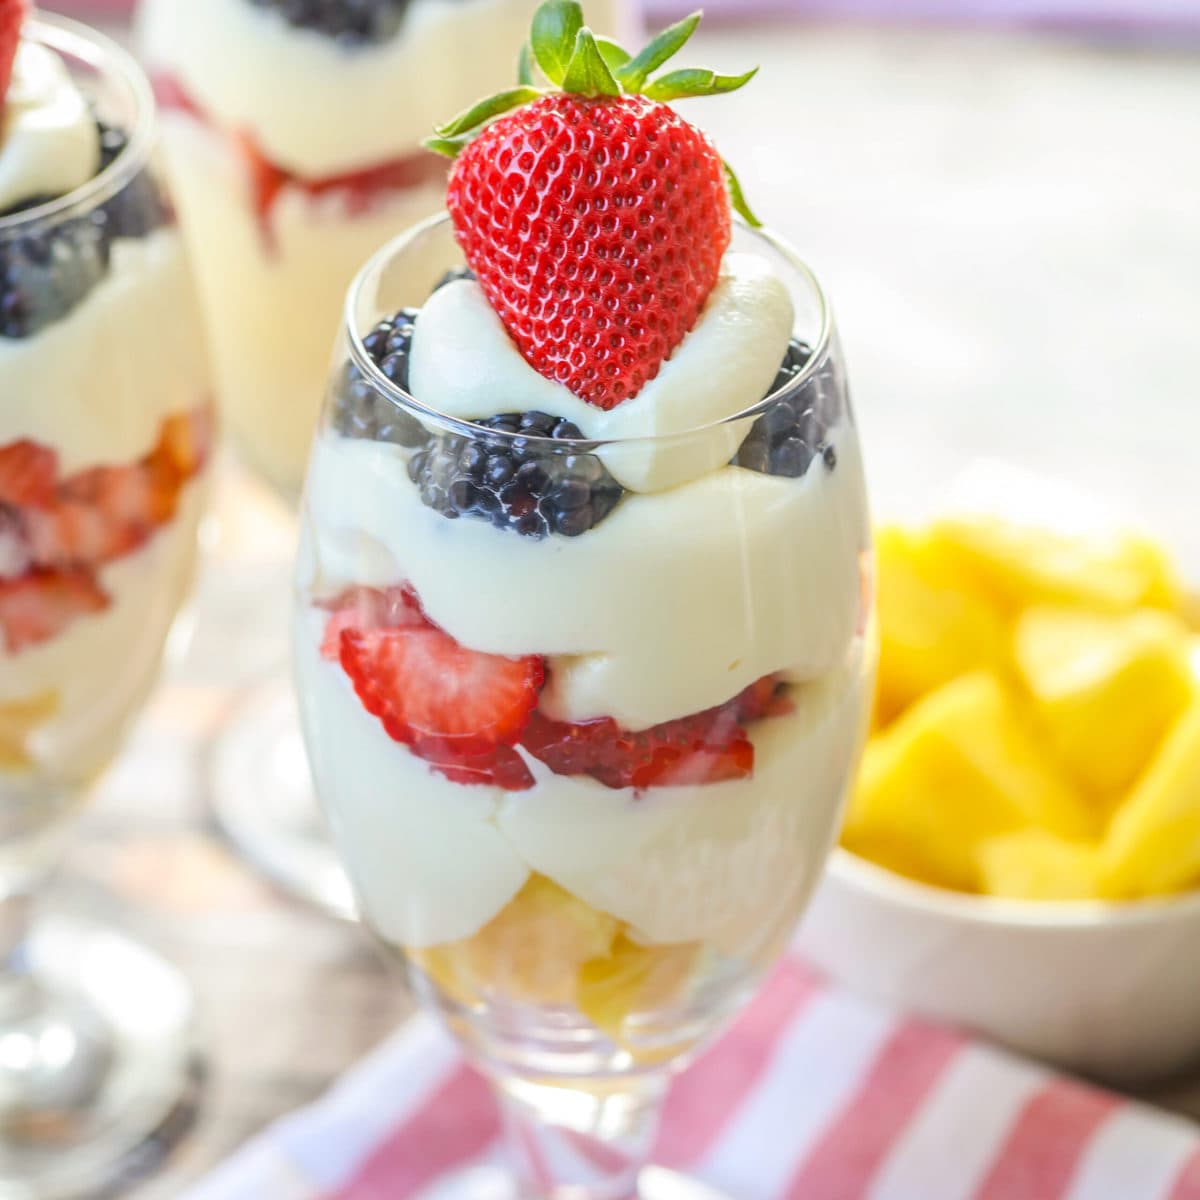 Strawberry pineapple parfait layered in a glass